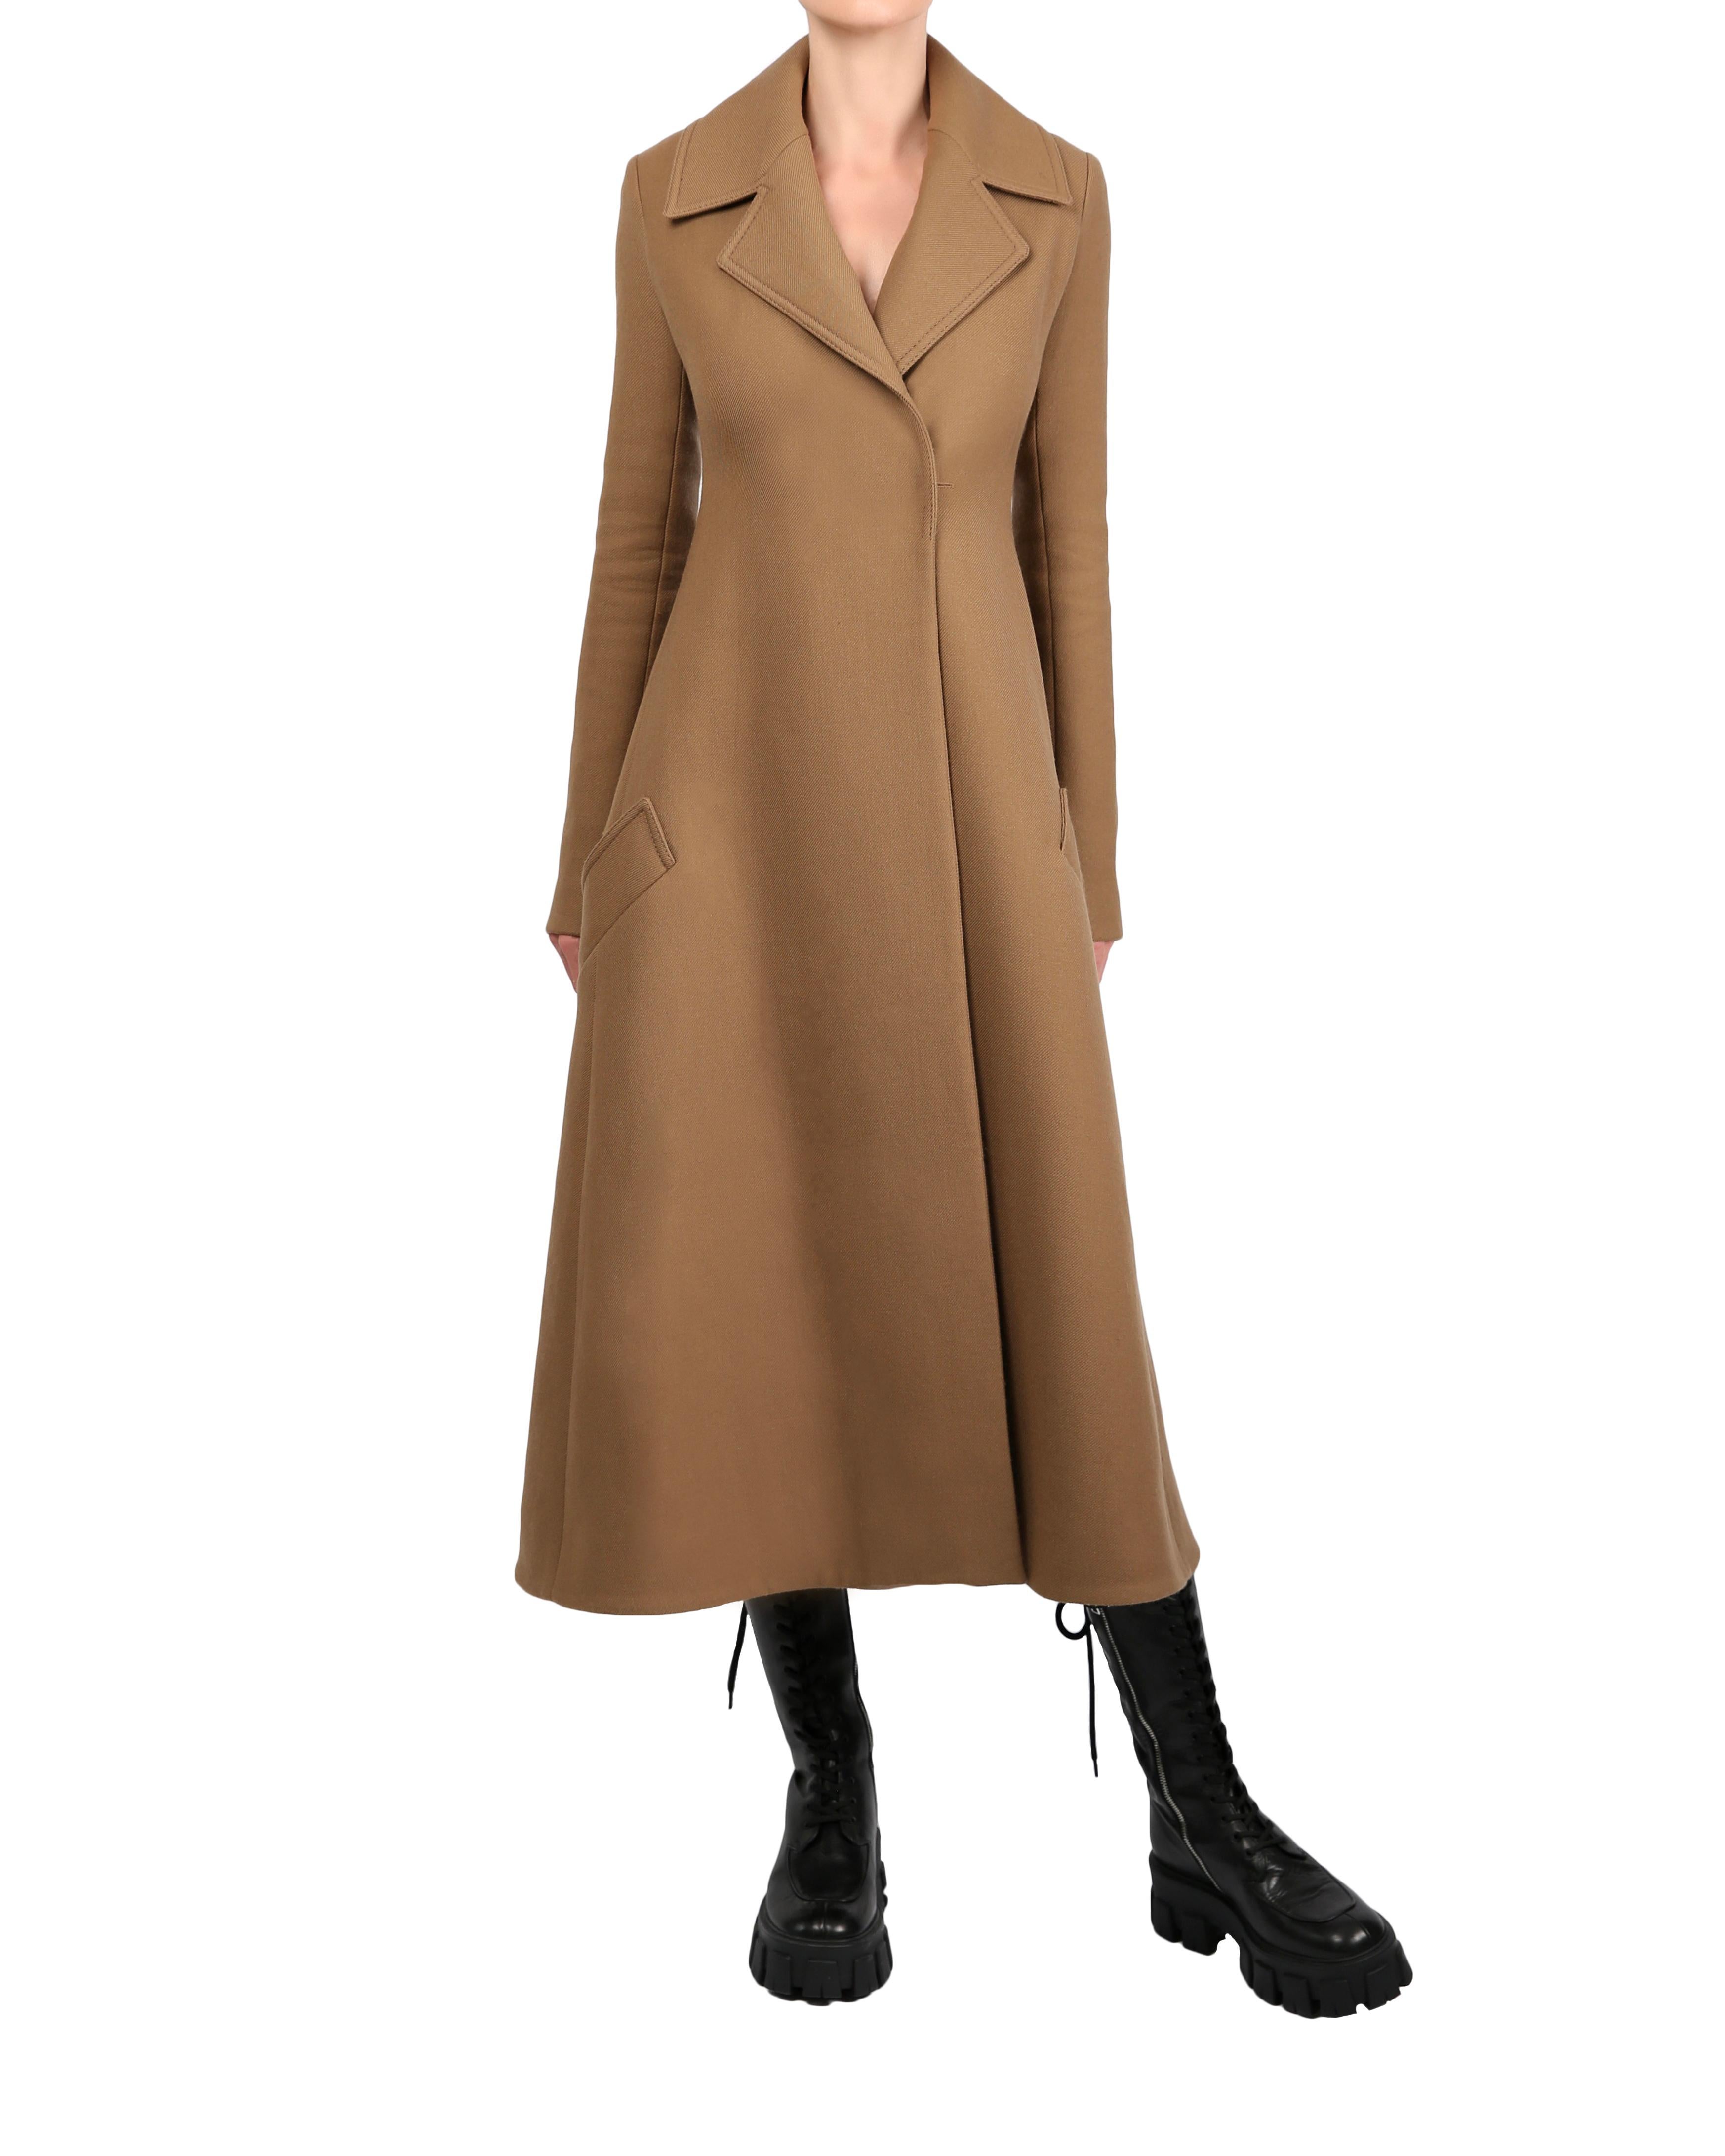 Celine Fall 2014 gabardine wool coat in camel by Phoebe Philo 
Fit and flare style coat with oversized collar and two large slanted pockets to the front 
Midi length, though please take note of the measurements as this coat has been modelled on a